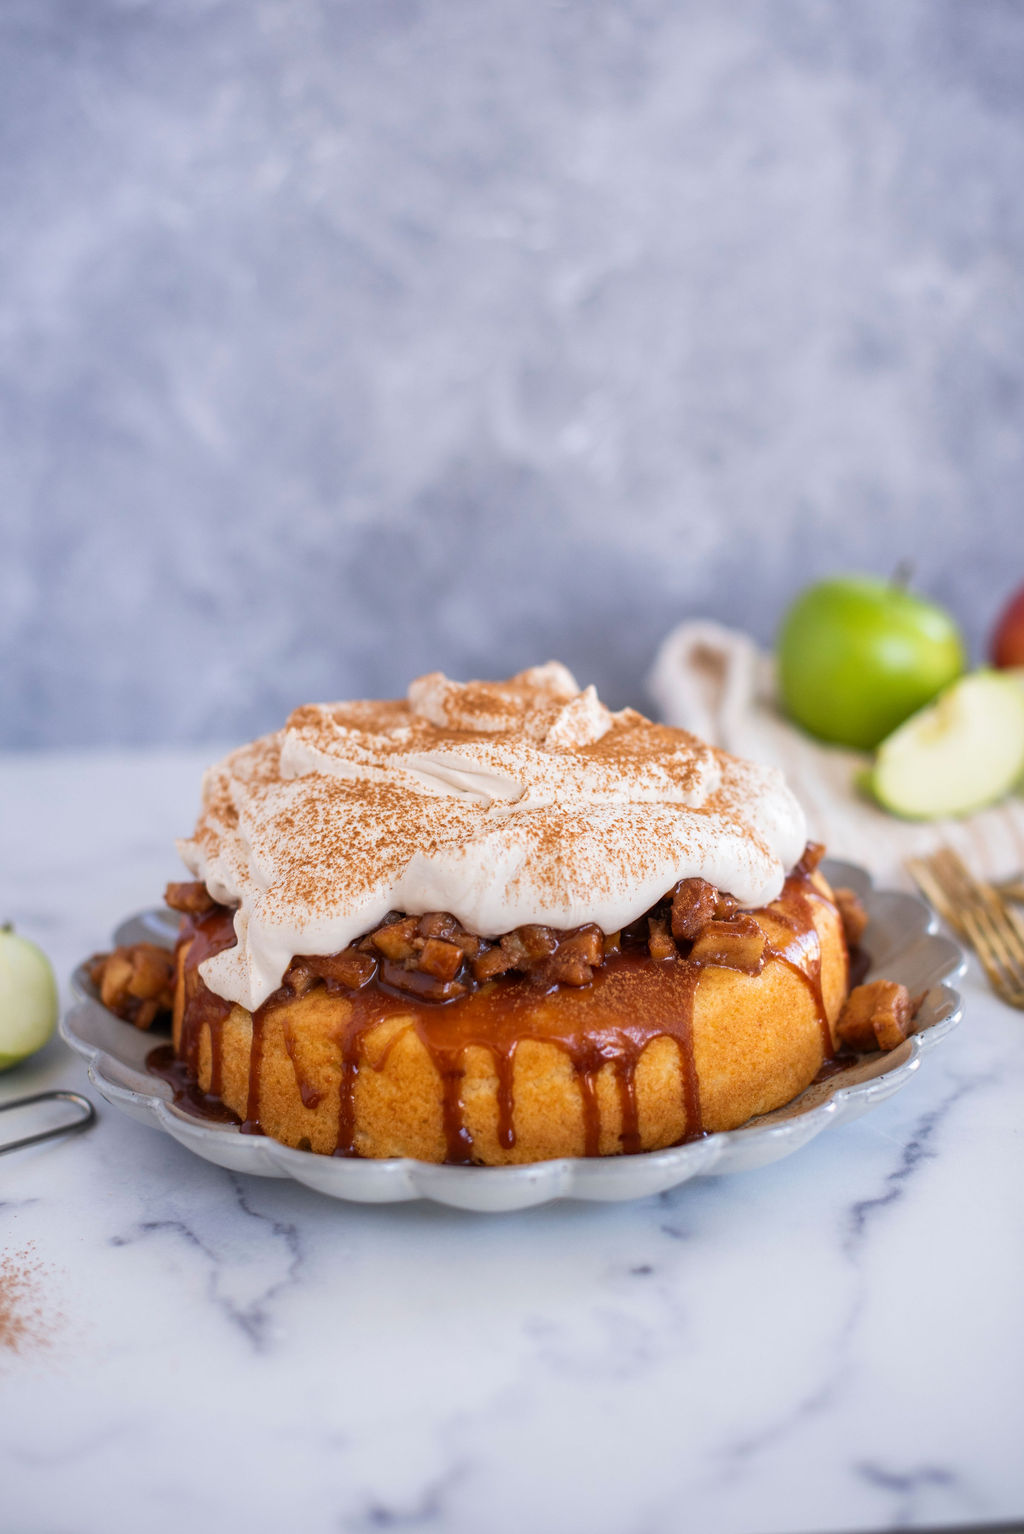 Cake on a serving dish with apples.